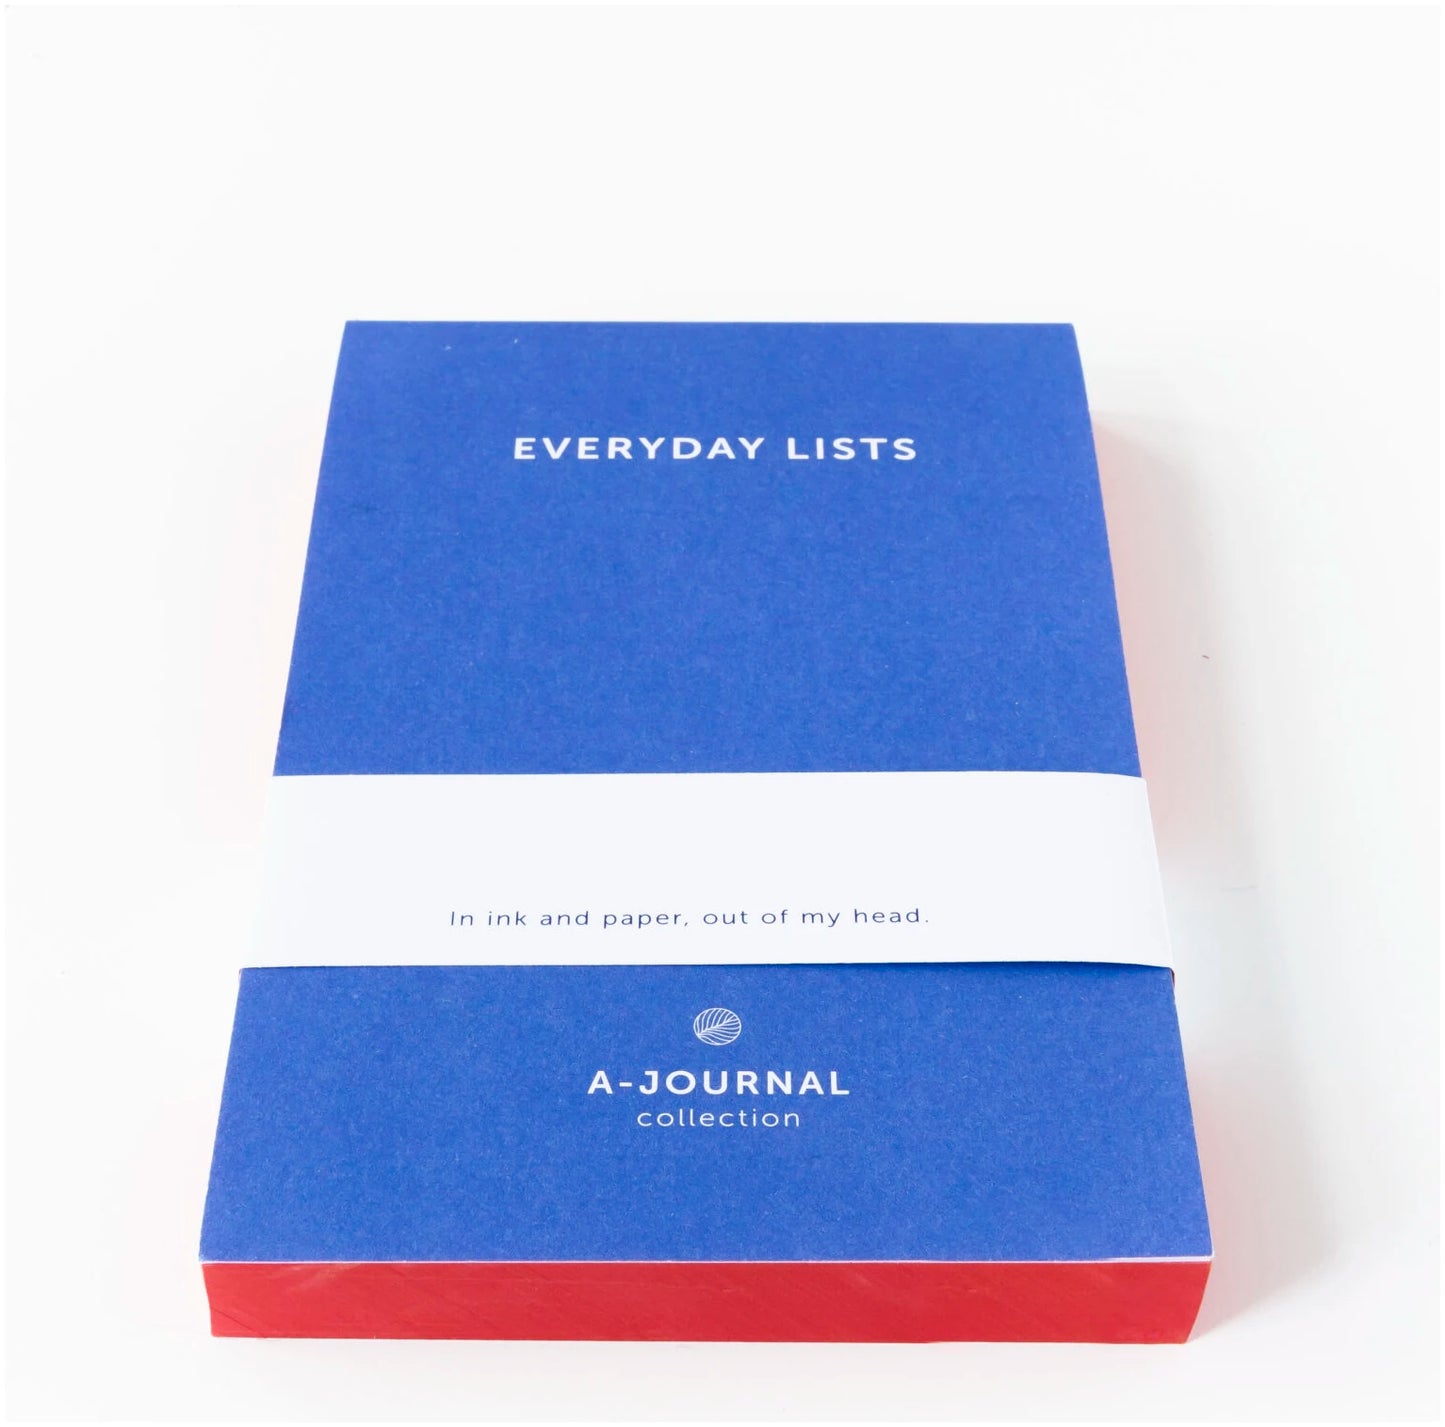 My journal - everyday lists